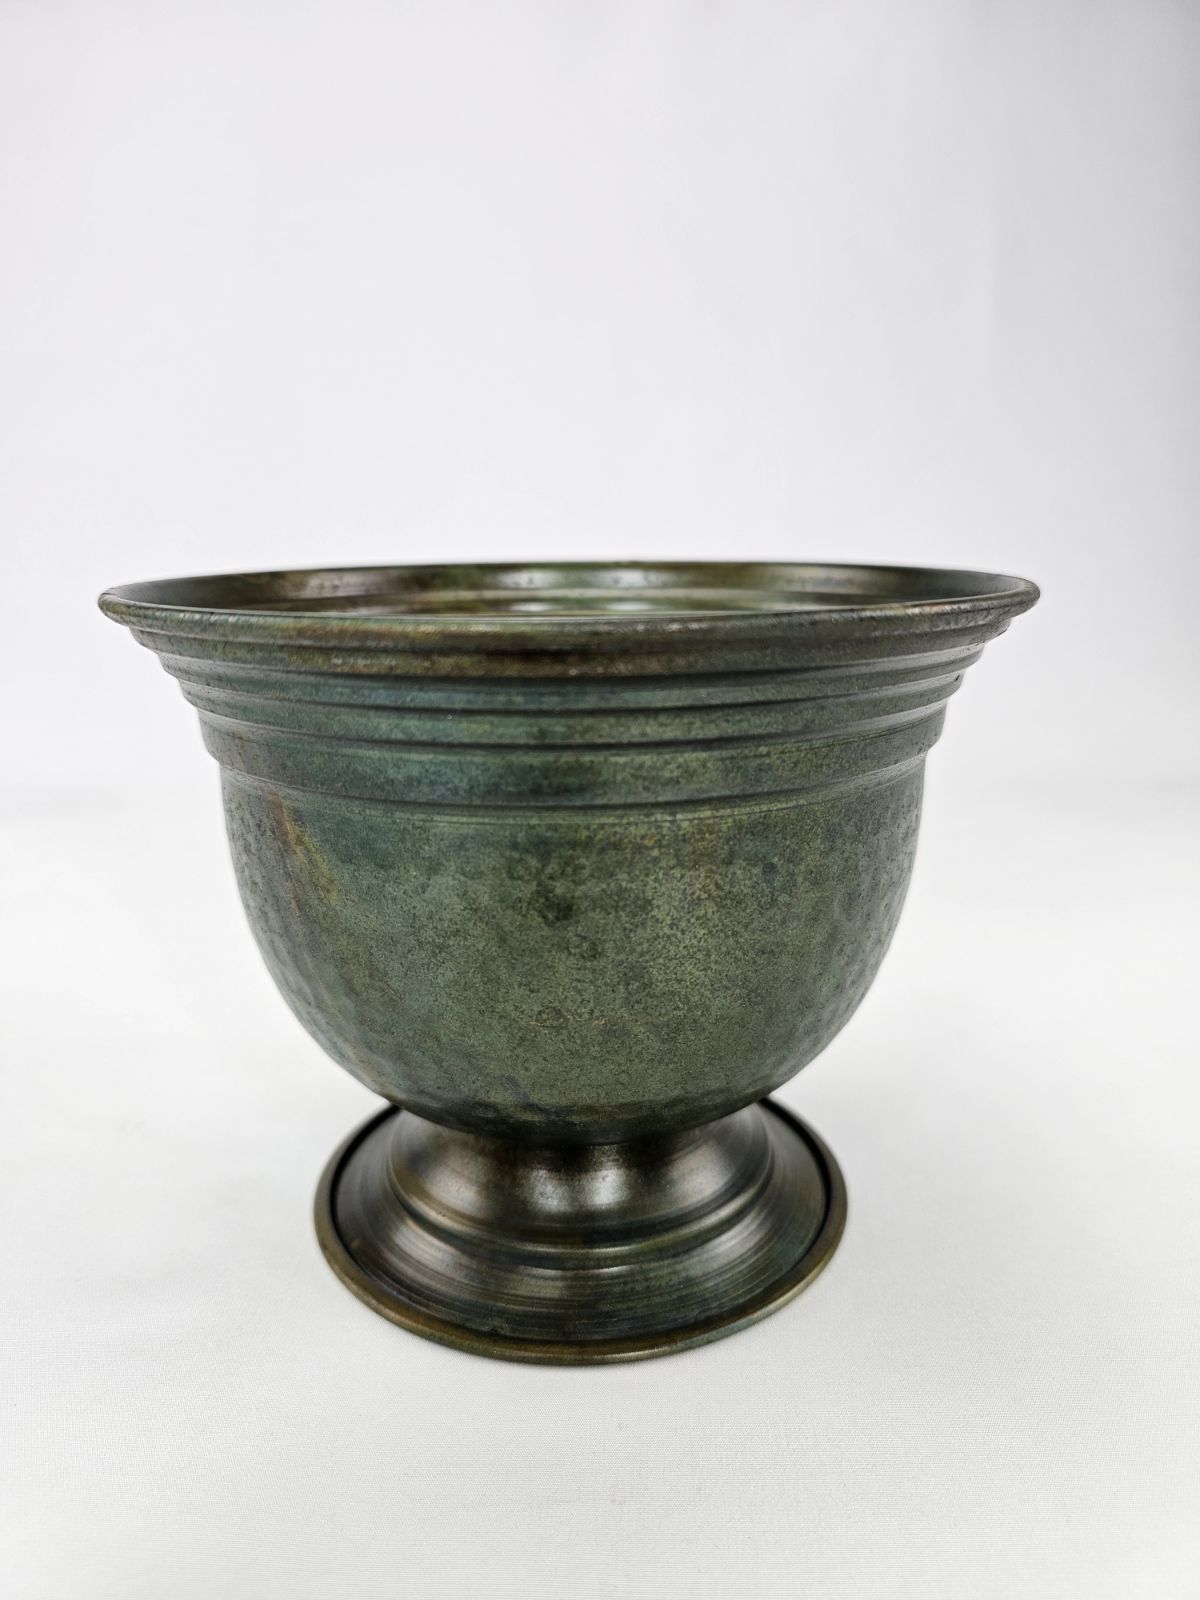 Metal compote container for floral designs -brown patina - Greenery MarketVasesKE257034